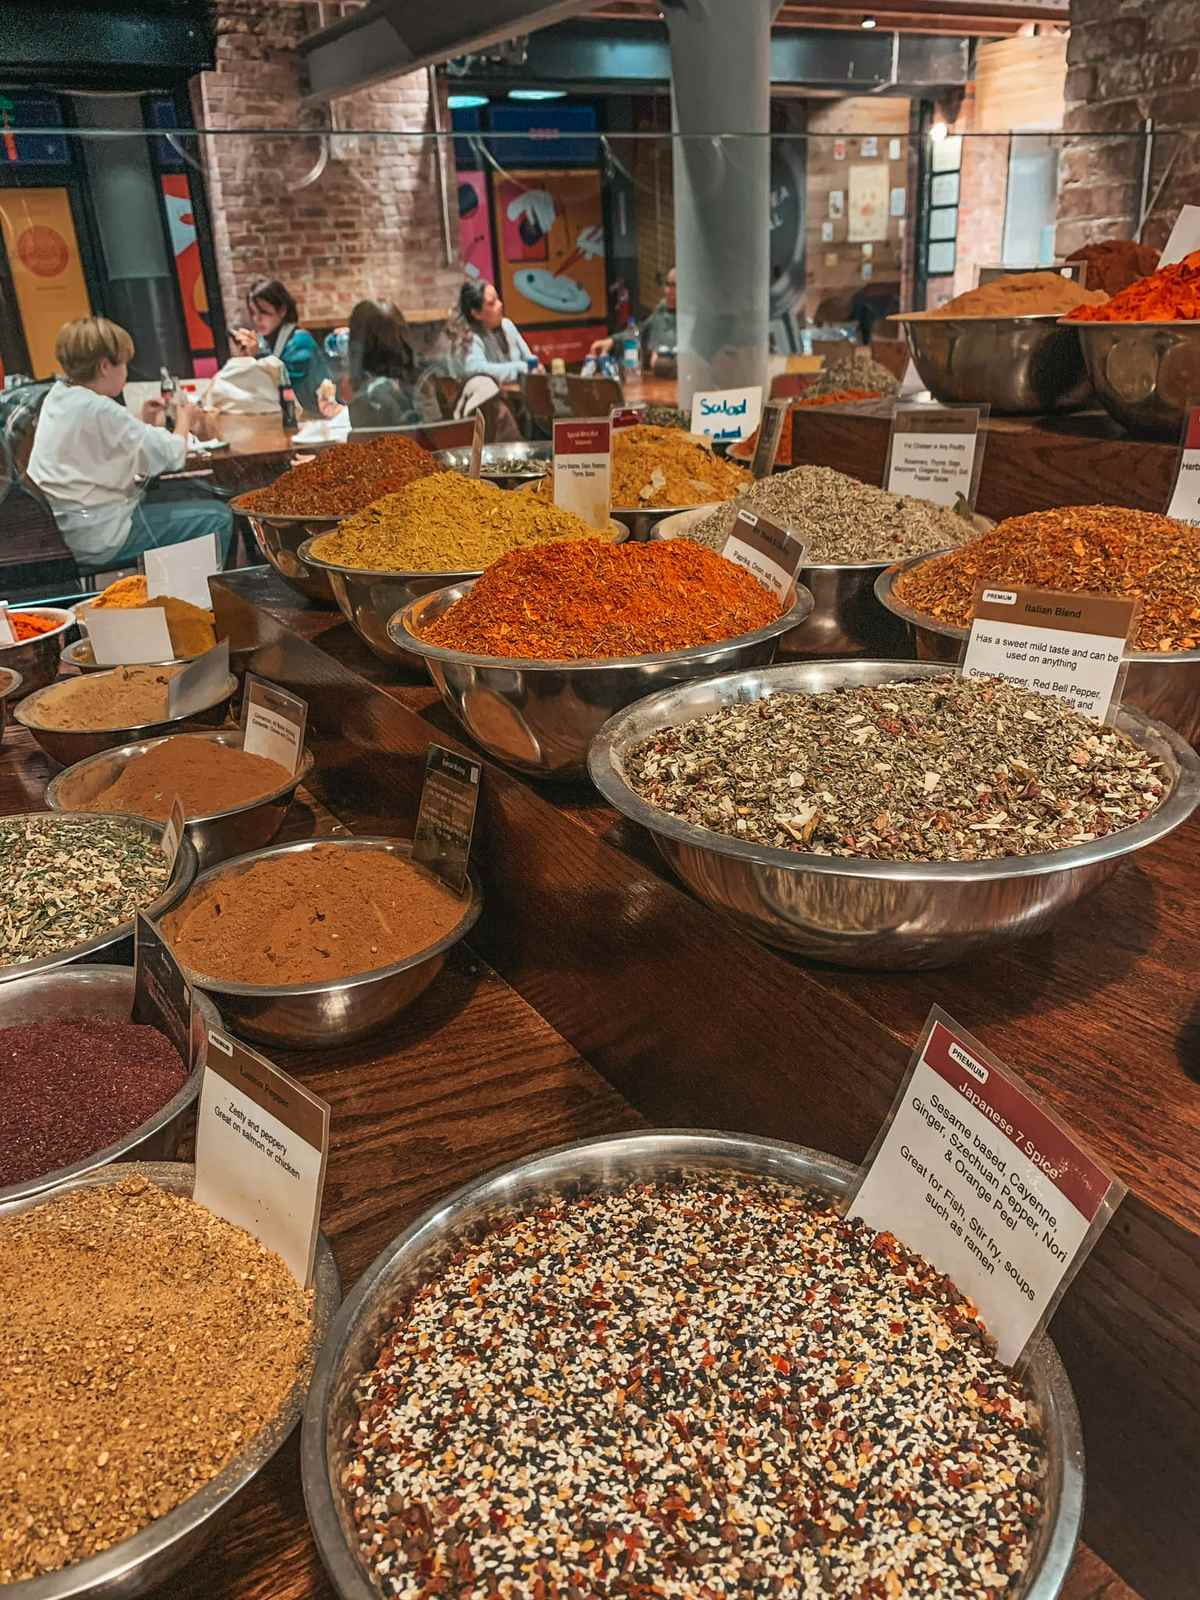 A variety of spices at the Chelsea Market in NYC